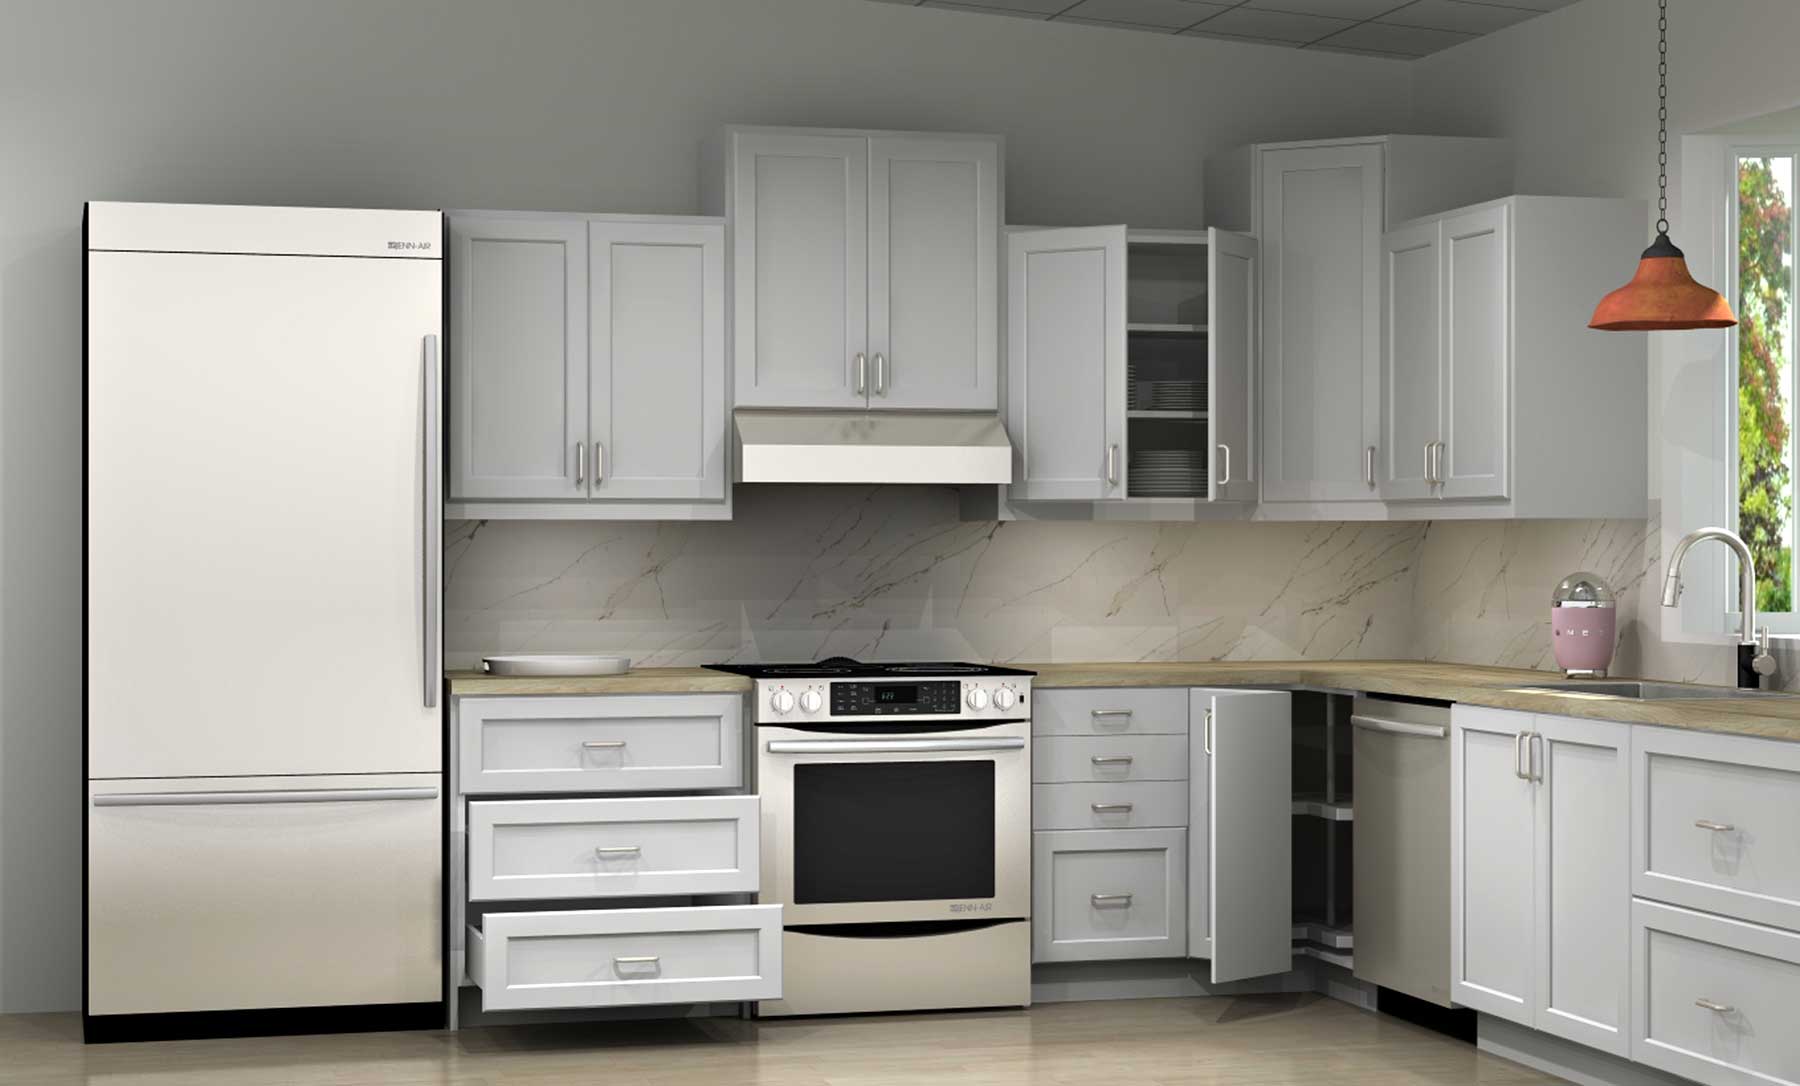 What Is The Standard Height And Depth Of Kitchen Wall Cabinets